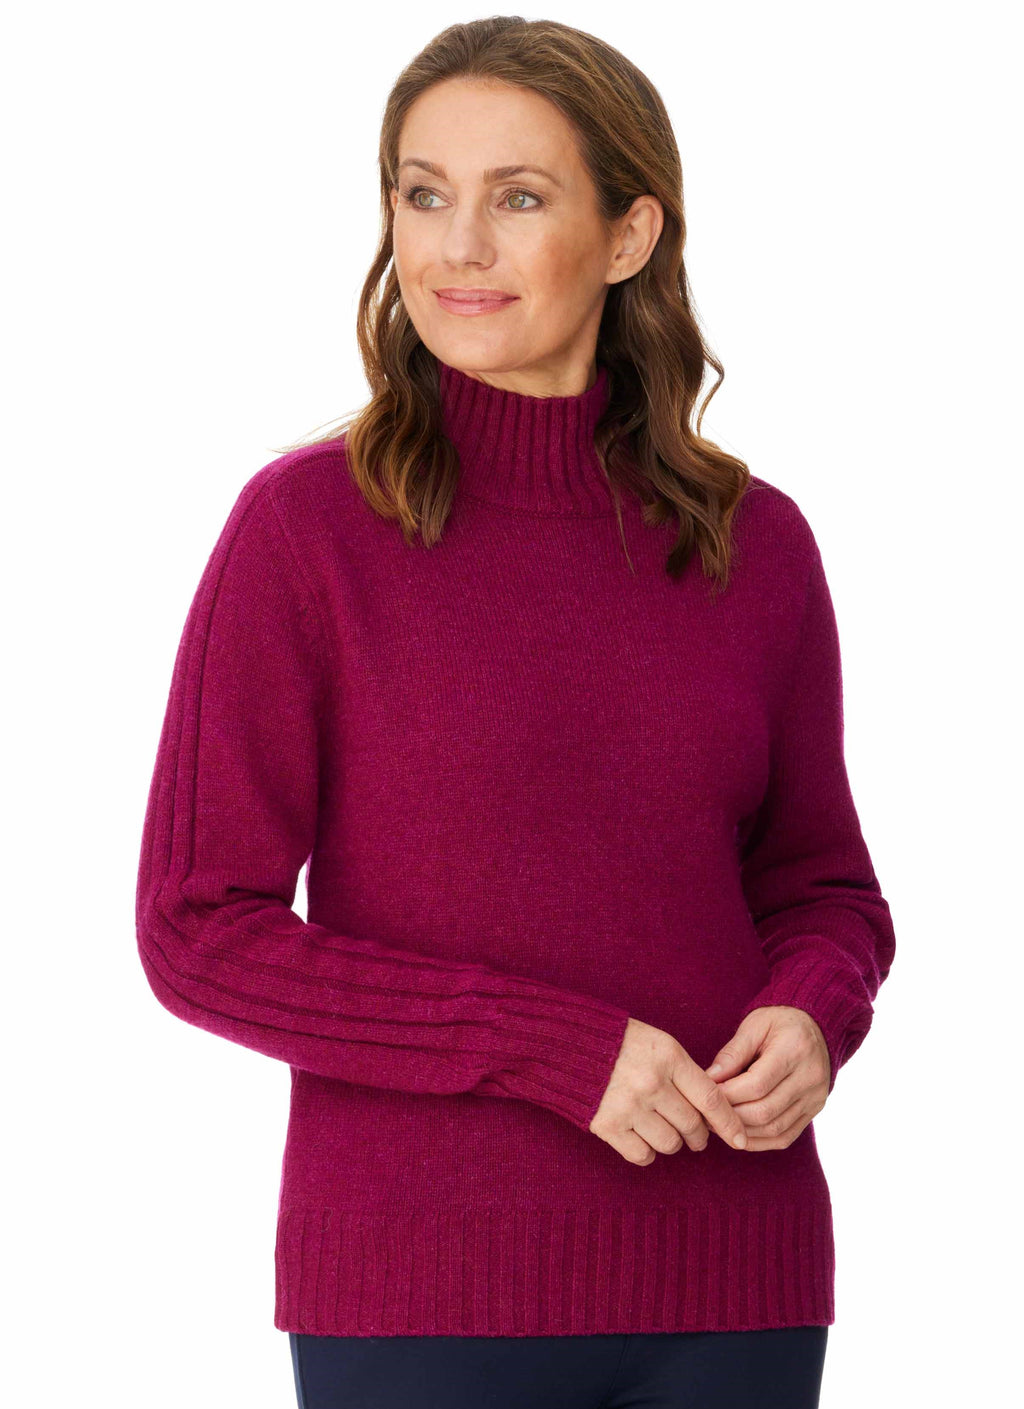 LIENA RIBBED SLEEVE PULLOVER - CHERRY RED